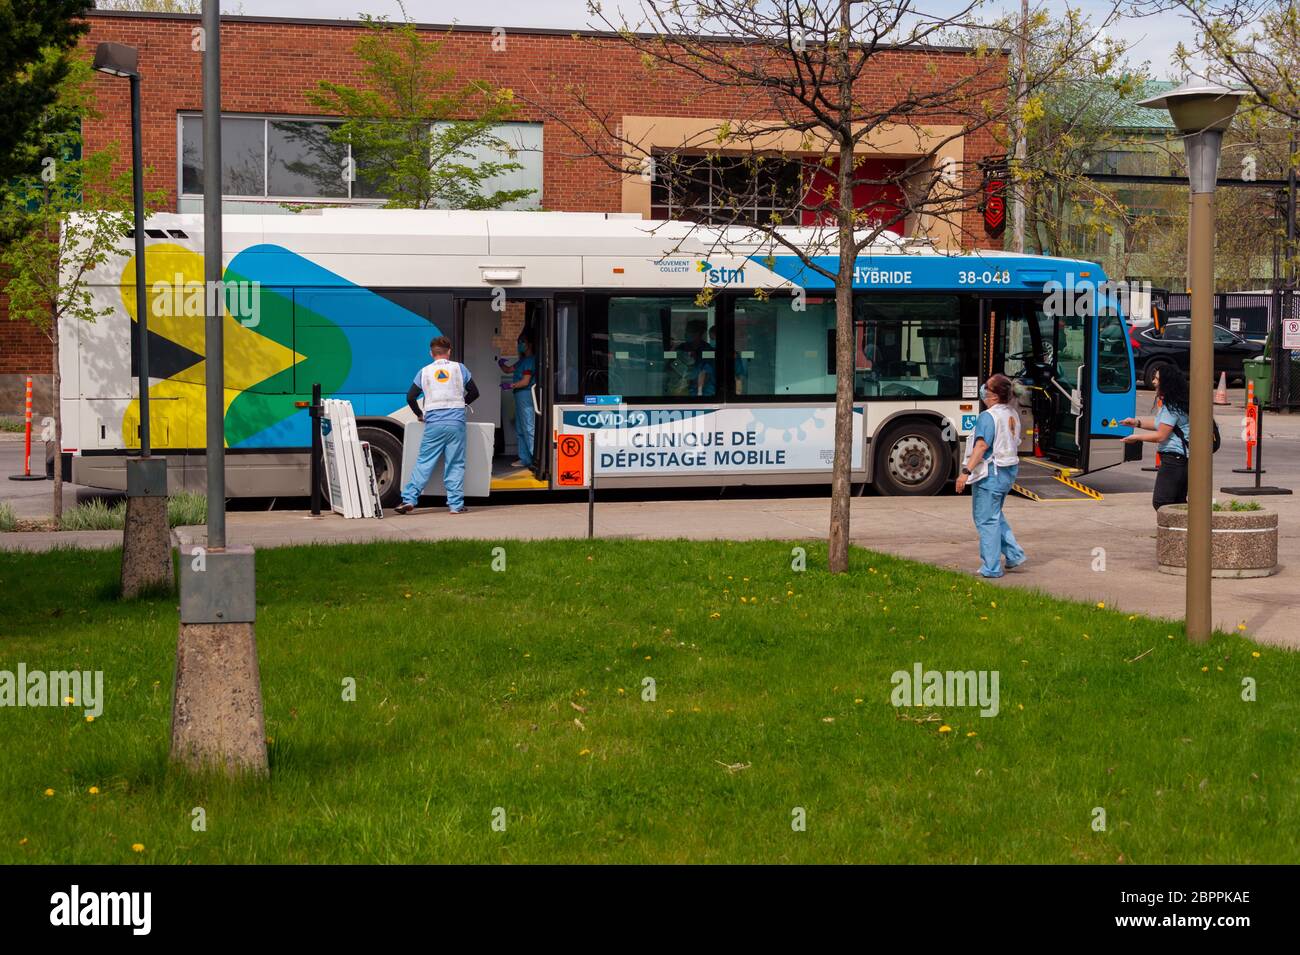 Montreal, CA - 19 May 2020: A STM city bus transformed into a mobile COVID-19 testing clinic on Fullum Street Stock Photo